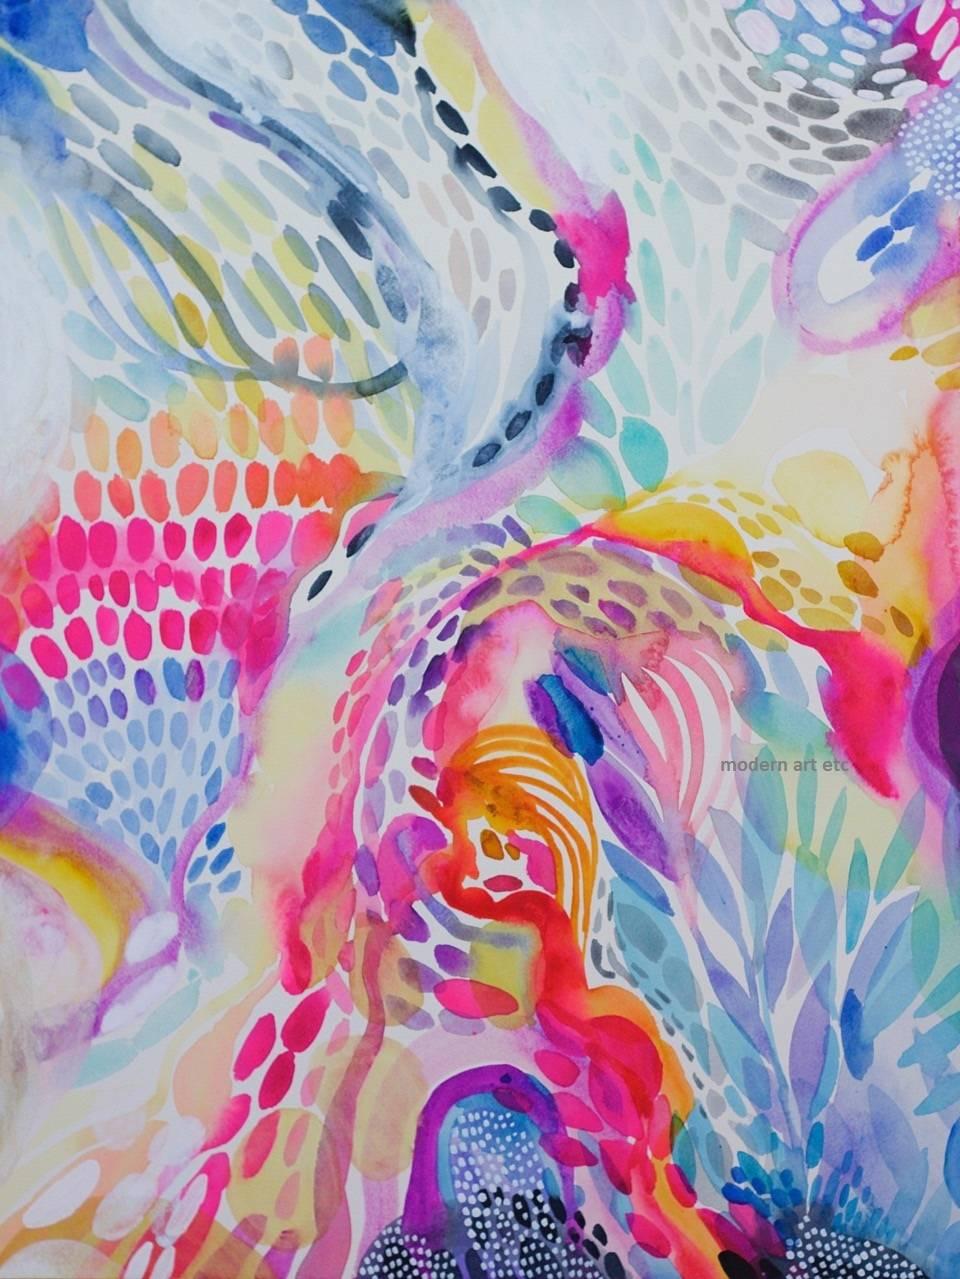 MAE Curates Abstract Painting - Delicate colorful intricate watercolor handpainted on museum cotton rag paper